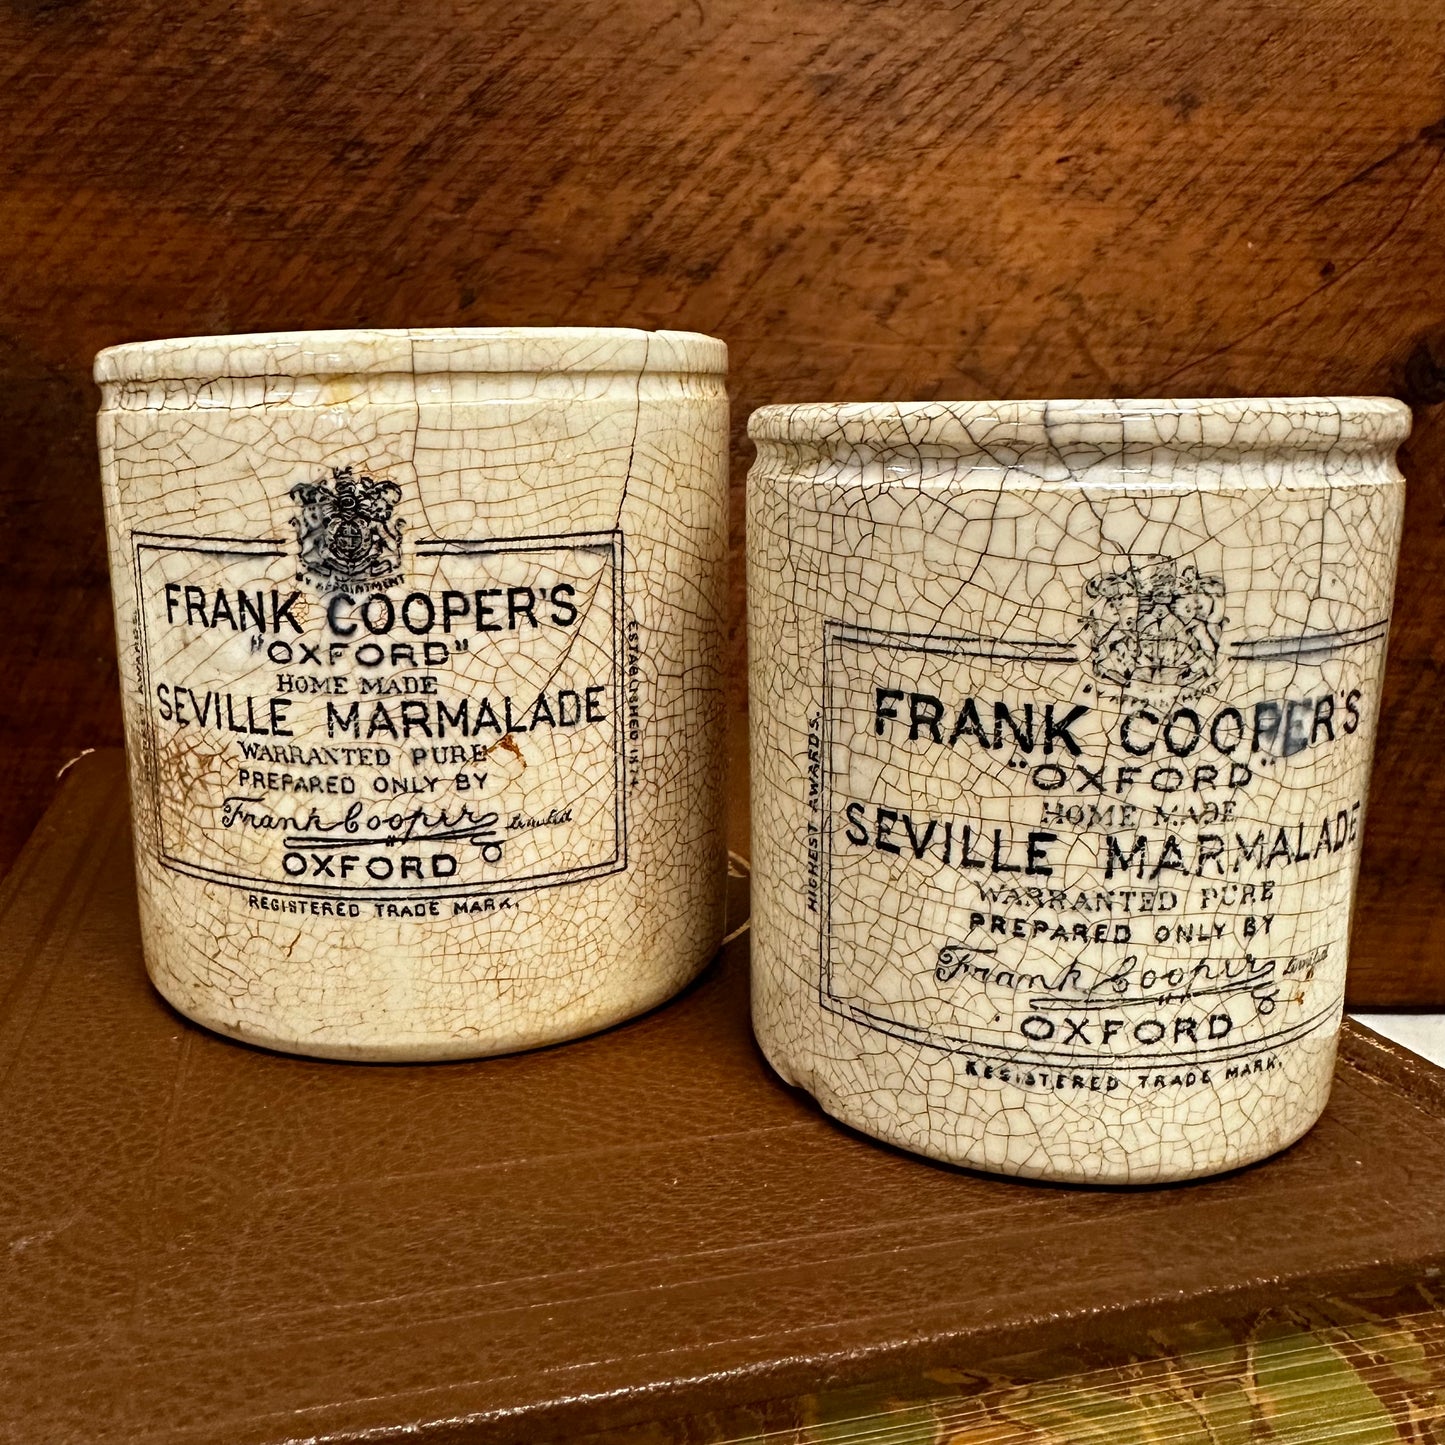 Frank Cooper Two Pound Marmalade